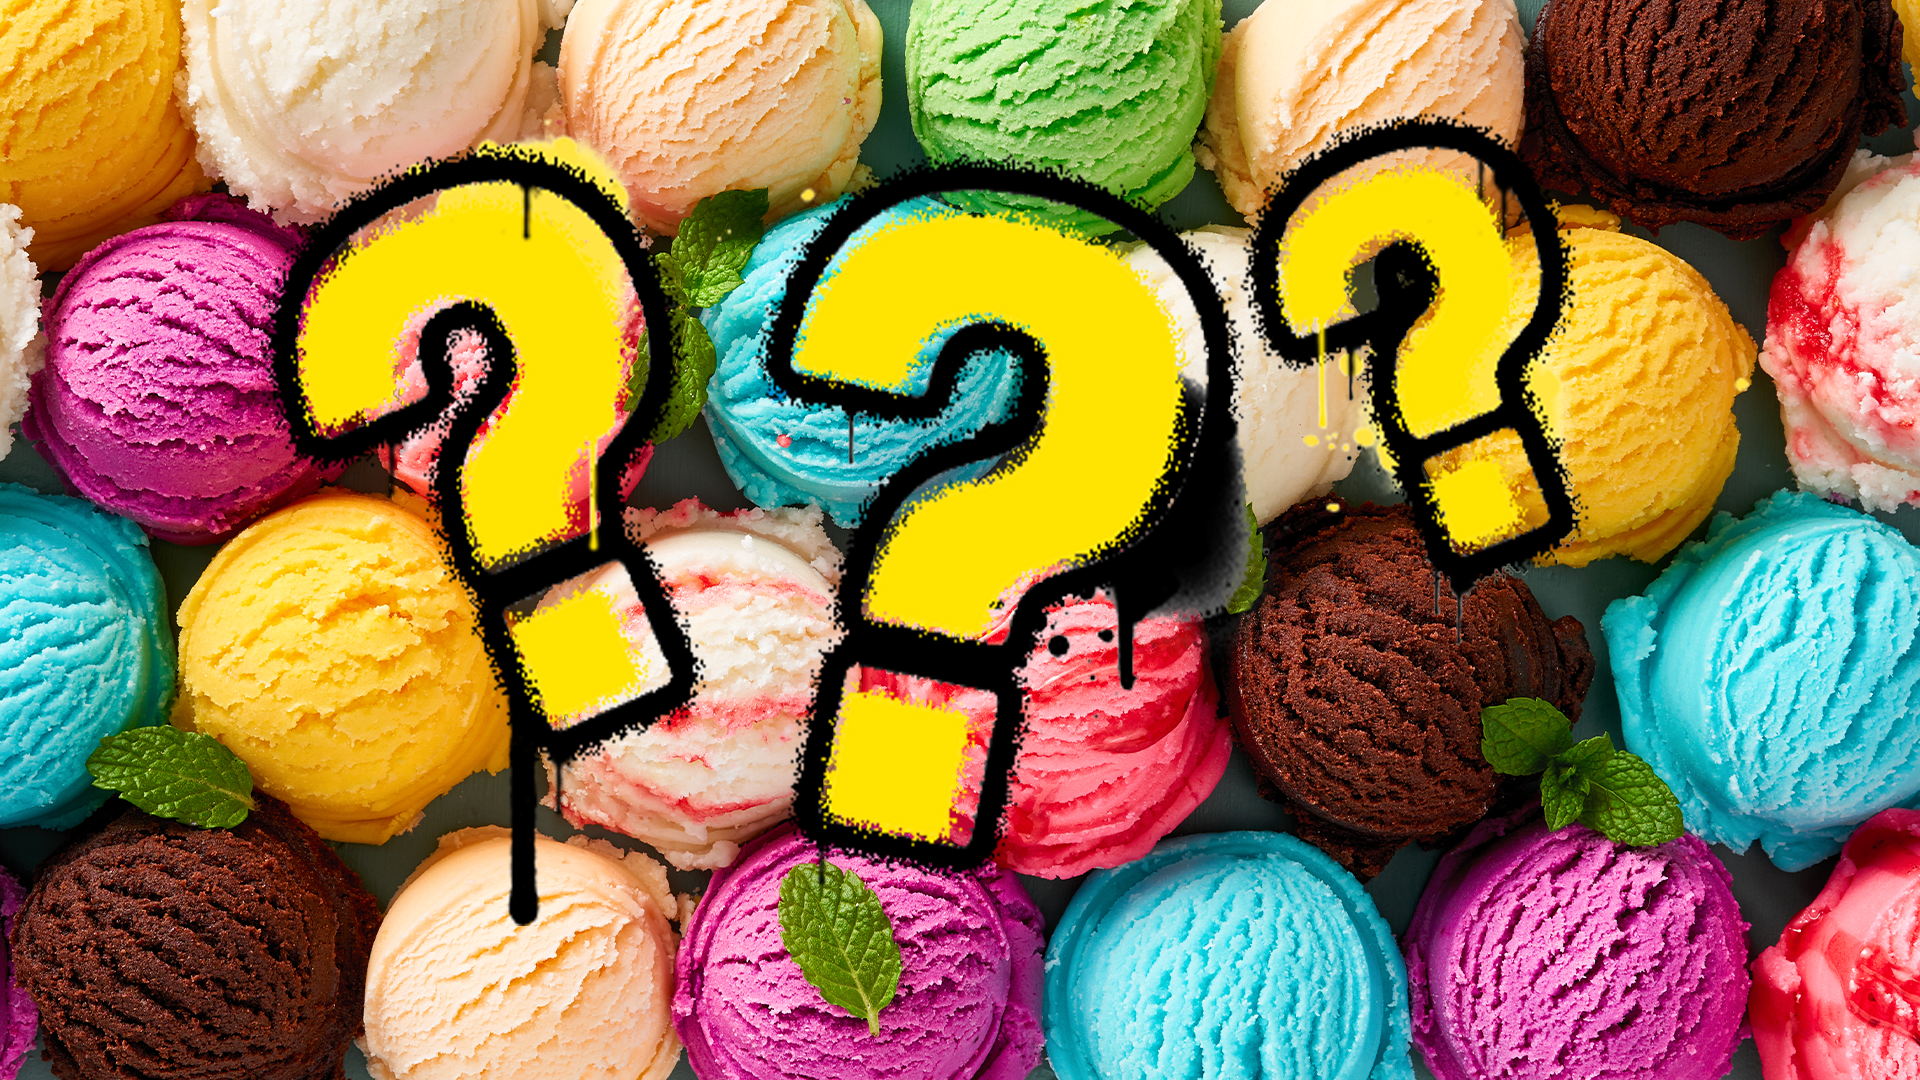 Lots of different ice cream flavours and question marks